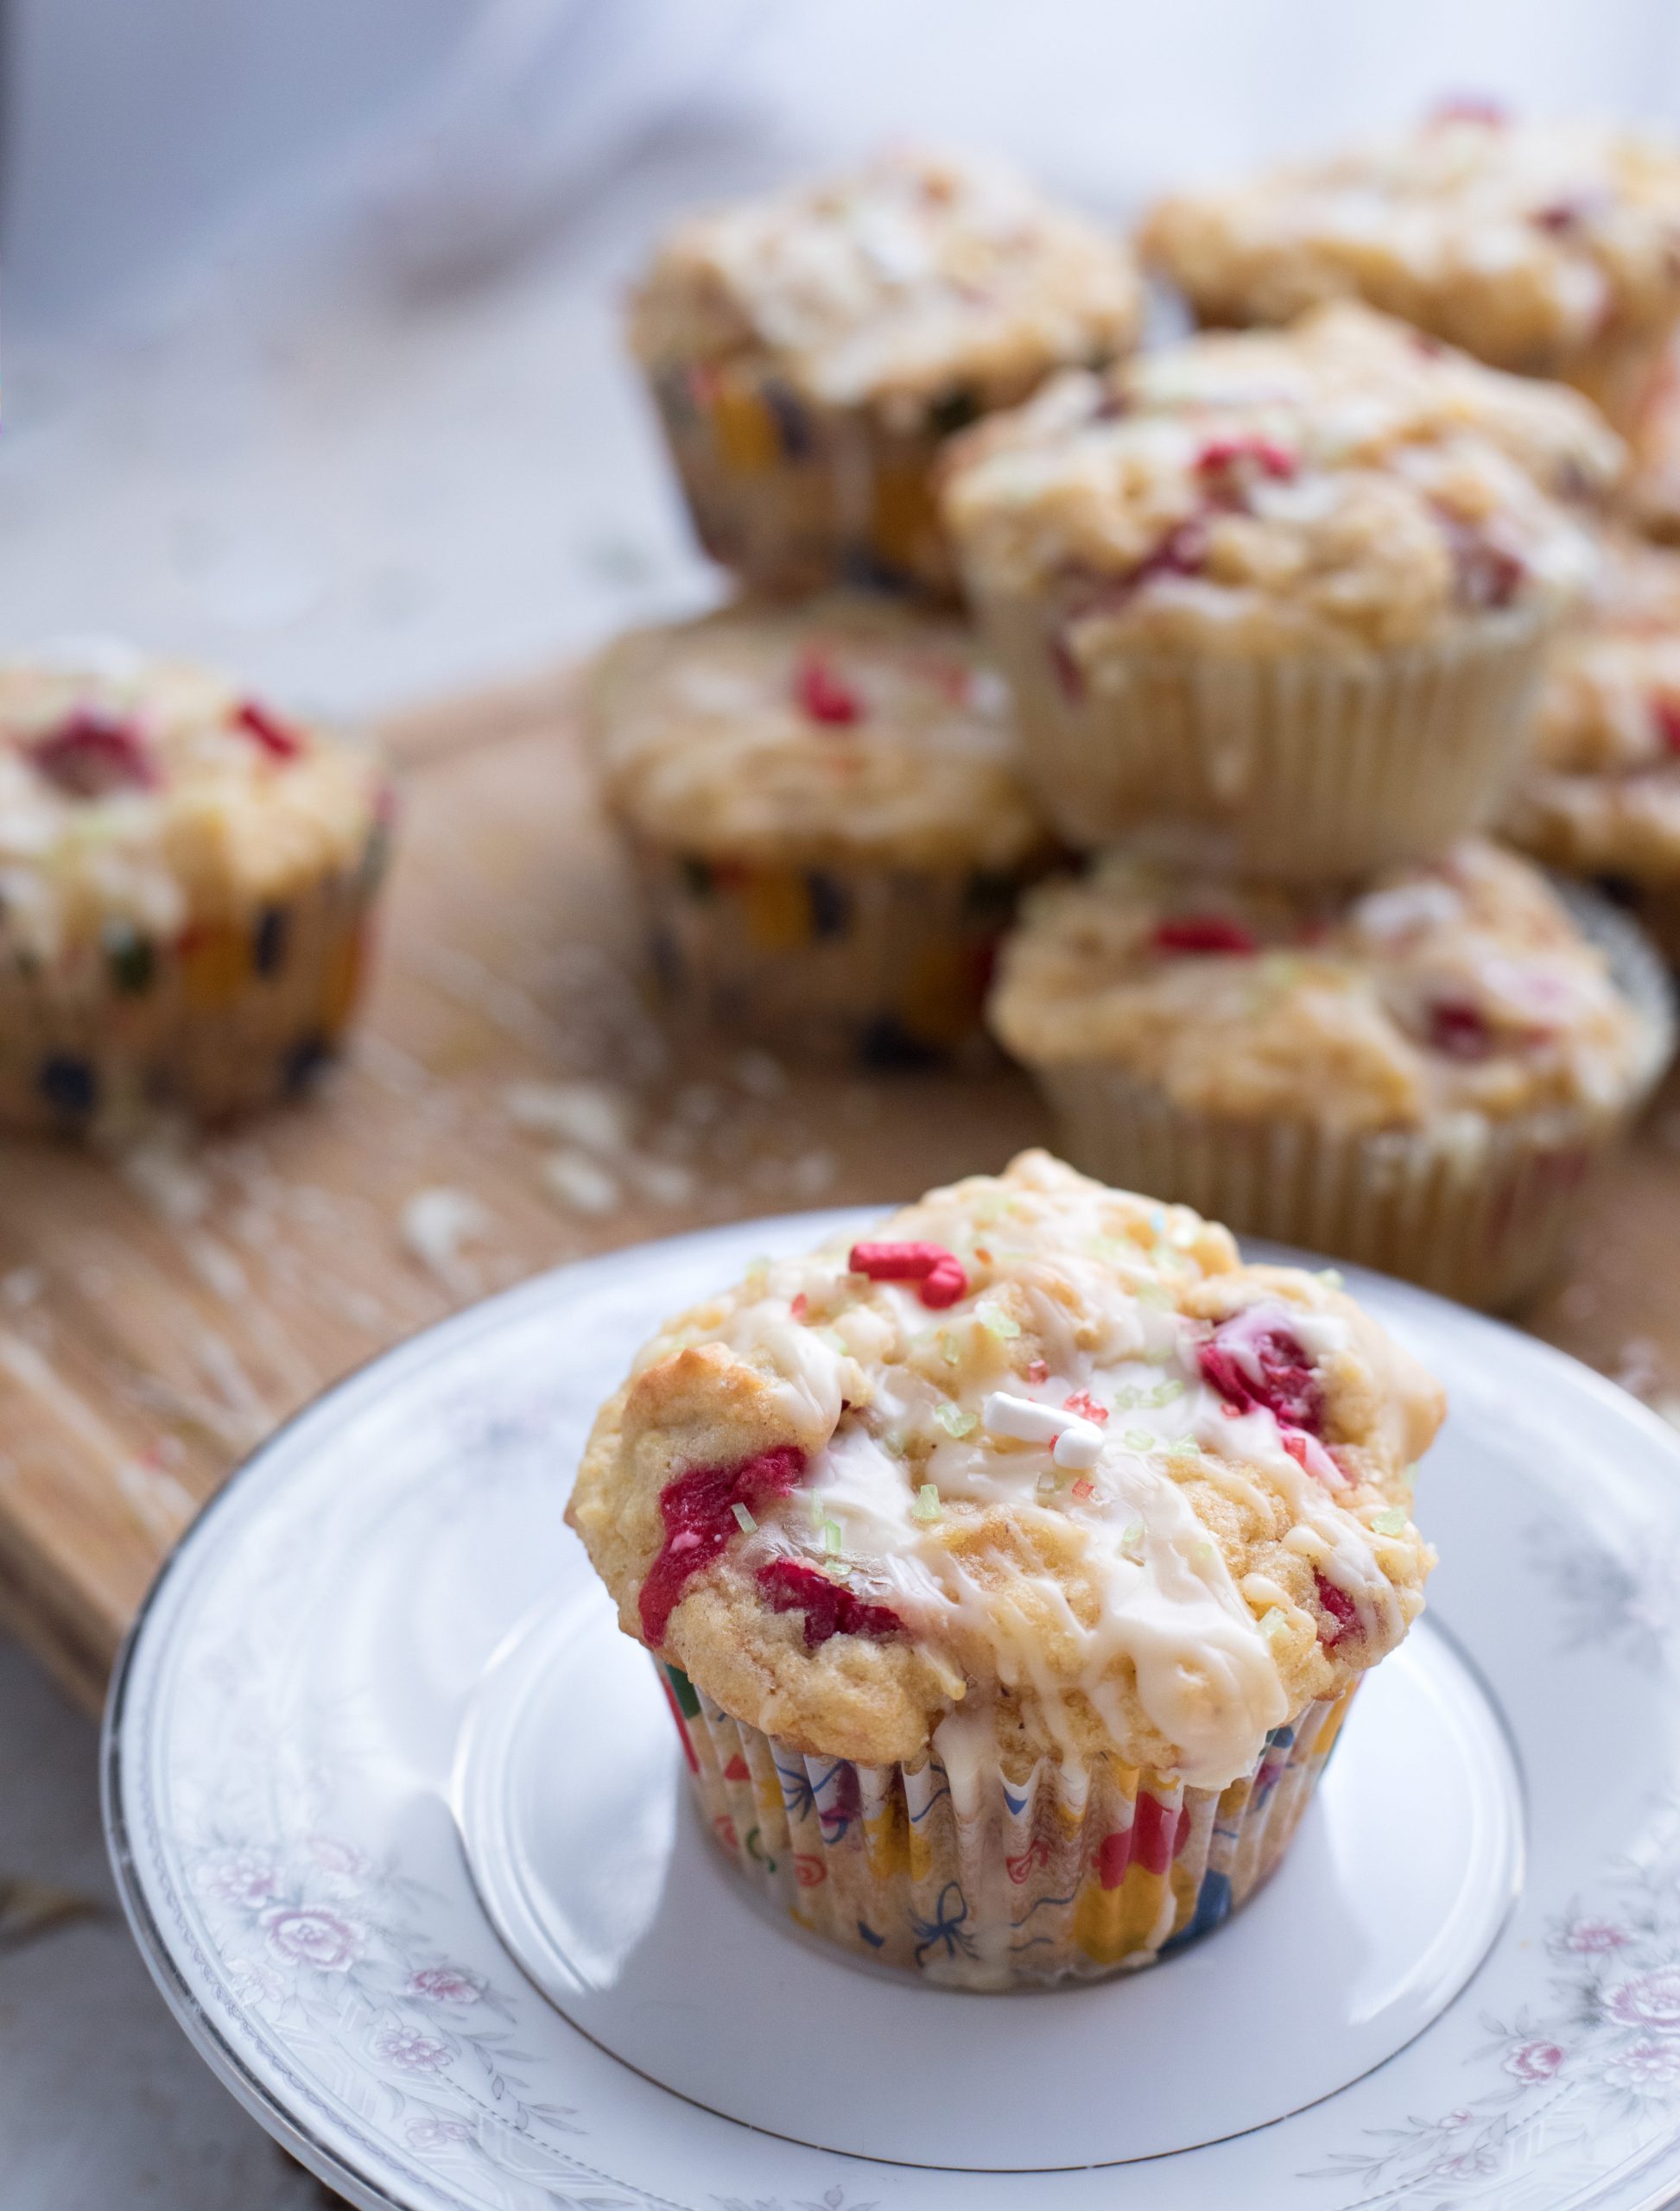 A cranberry orange muffin on a plate, with more muffins in the background